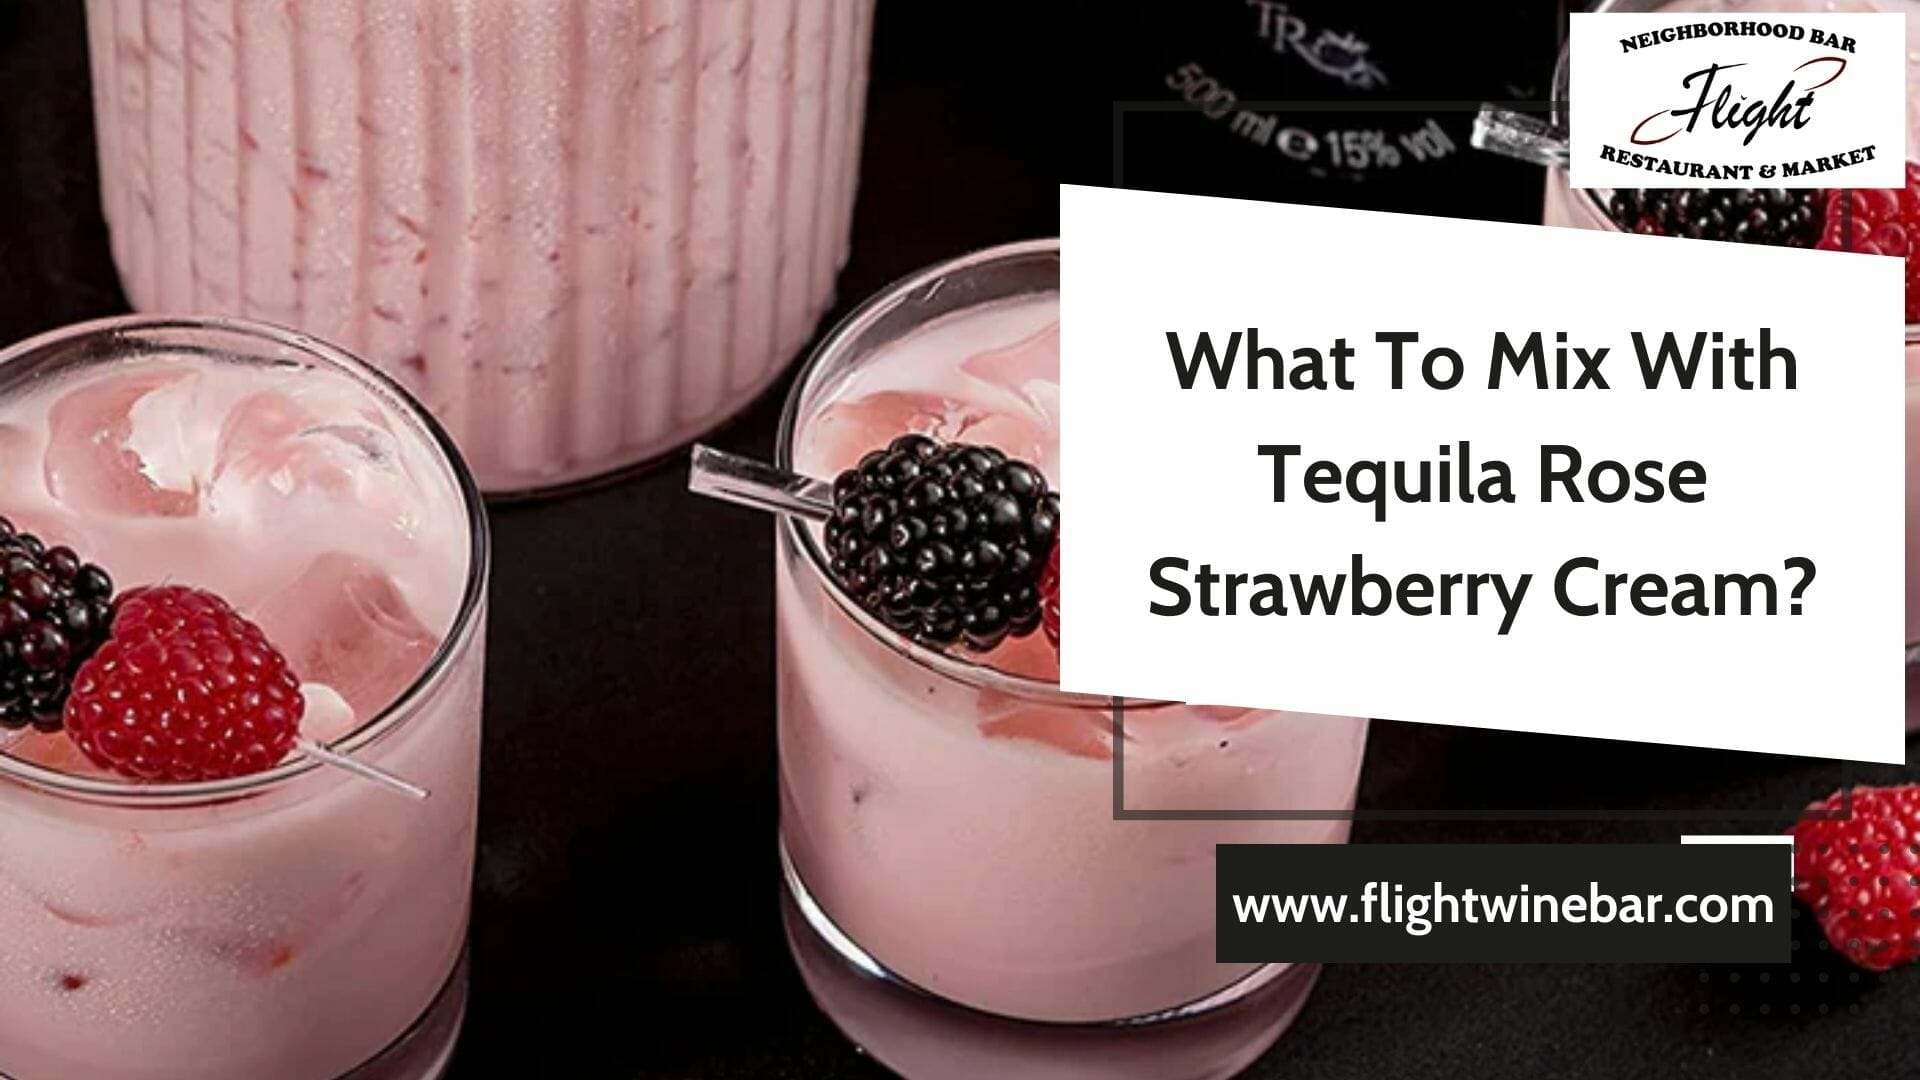 What To Mix With Tequila Rose Strawberry Cream